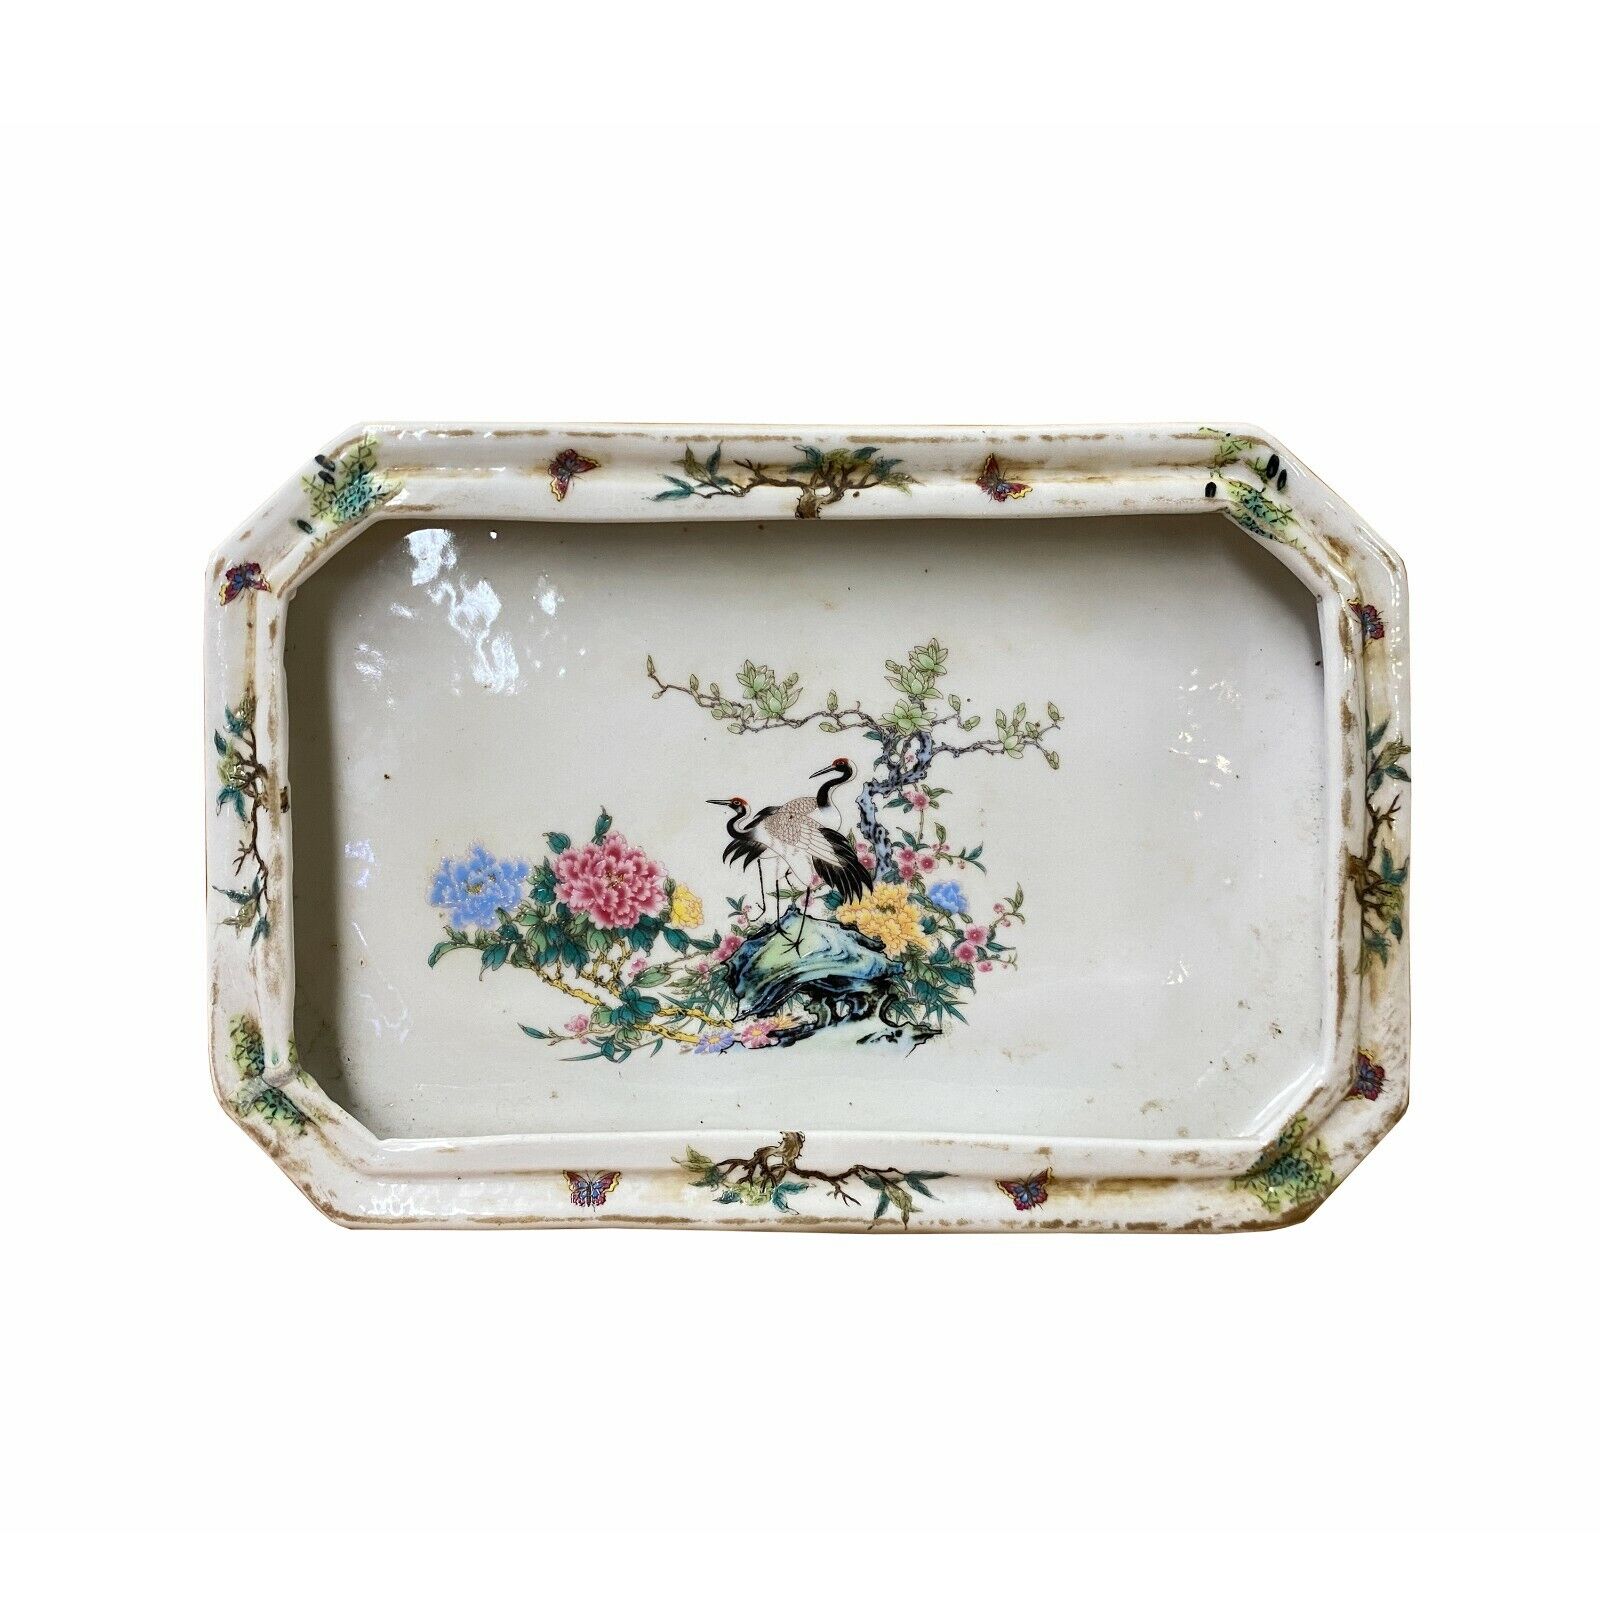 Chinese Off White Porcelain Flower Cranes Rectangular Display Plate ws1820